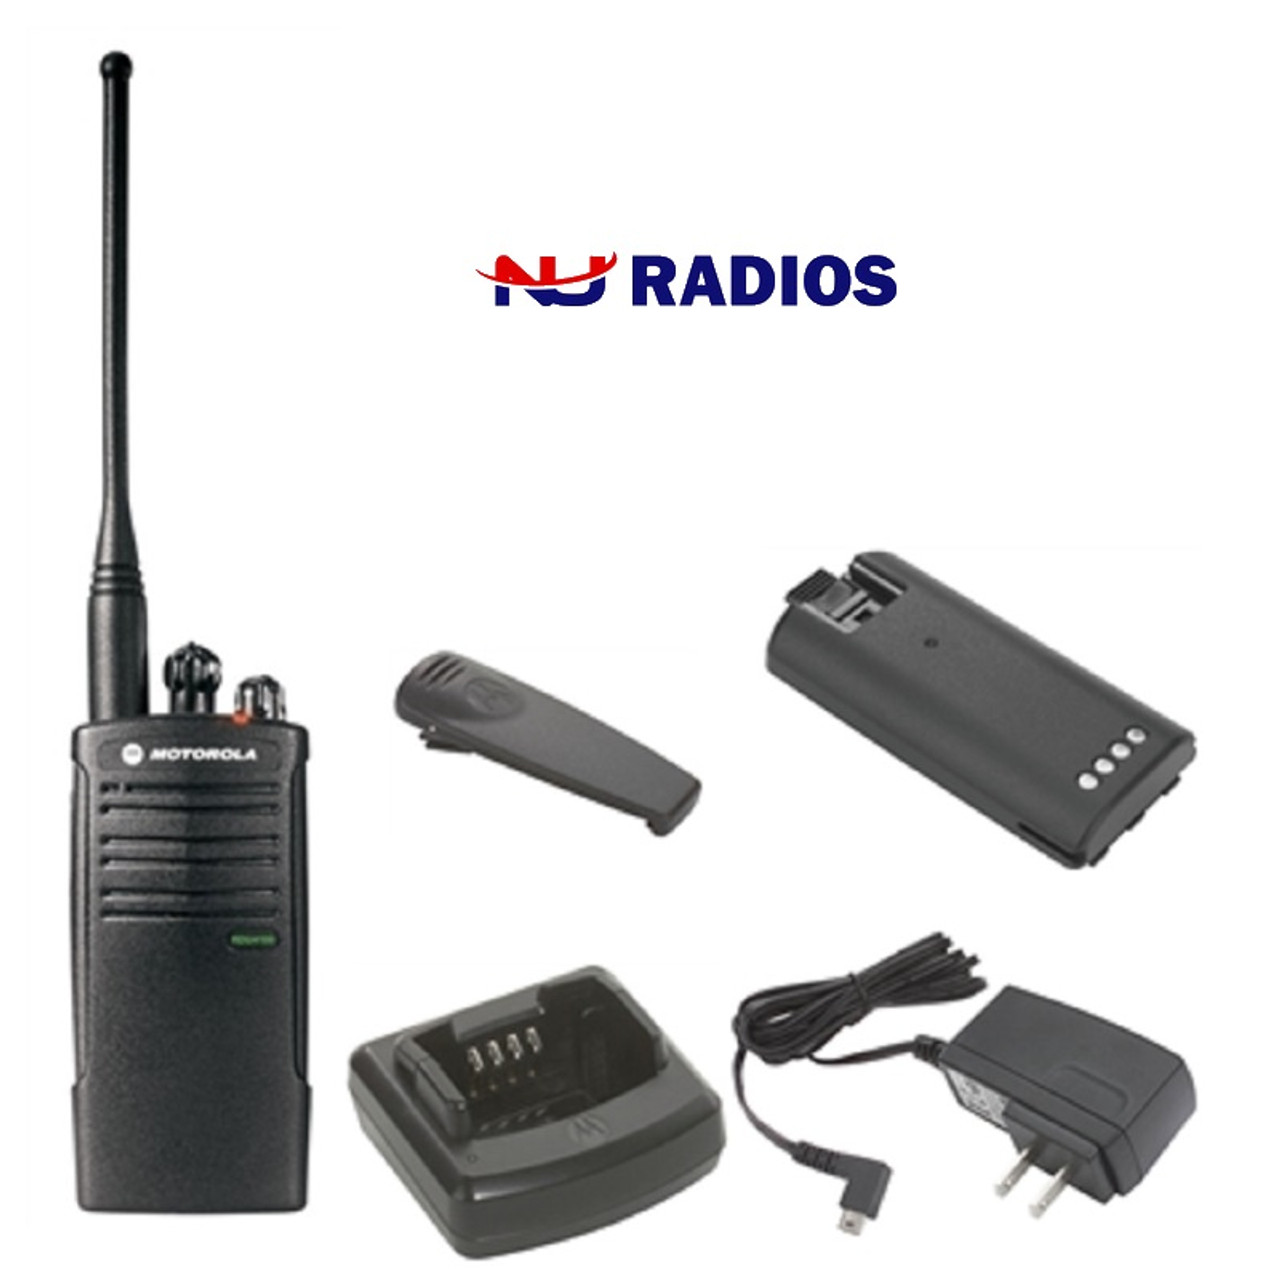 Top Seller, the Six Pack of Motorola RDU4100 Watt Business 2-Way UHF  Radios is just what you need. This radios is a workhorse and gets the job  done. Perfect for construction